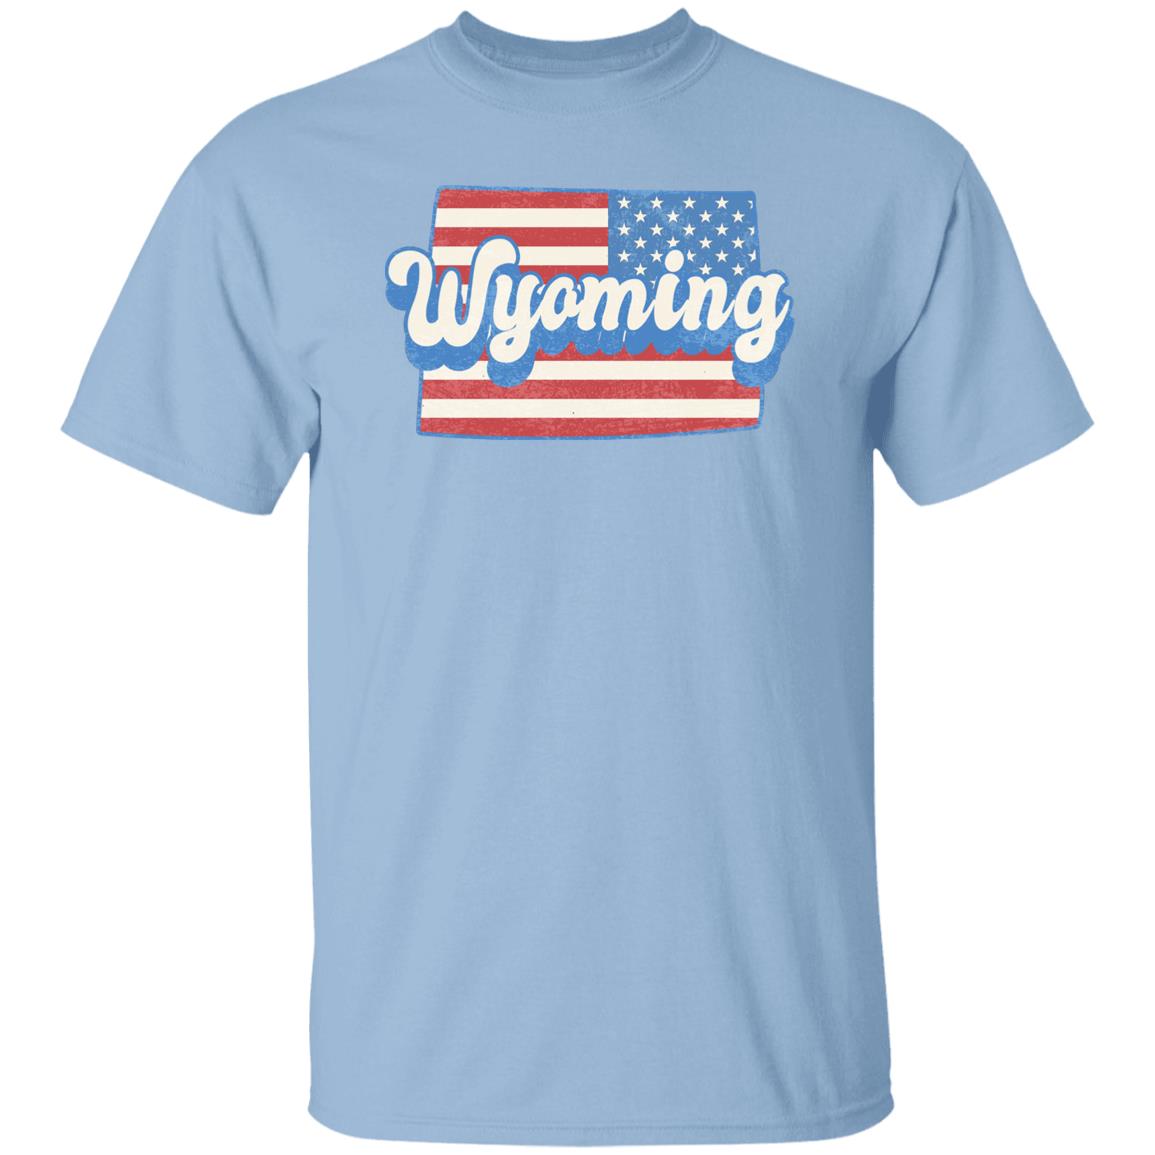 Wyoming US flag Unisex T-Shirt American patriotic WY state tee White Ash Blue-Light Blue-Family-Gift-Planet